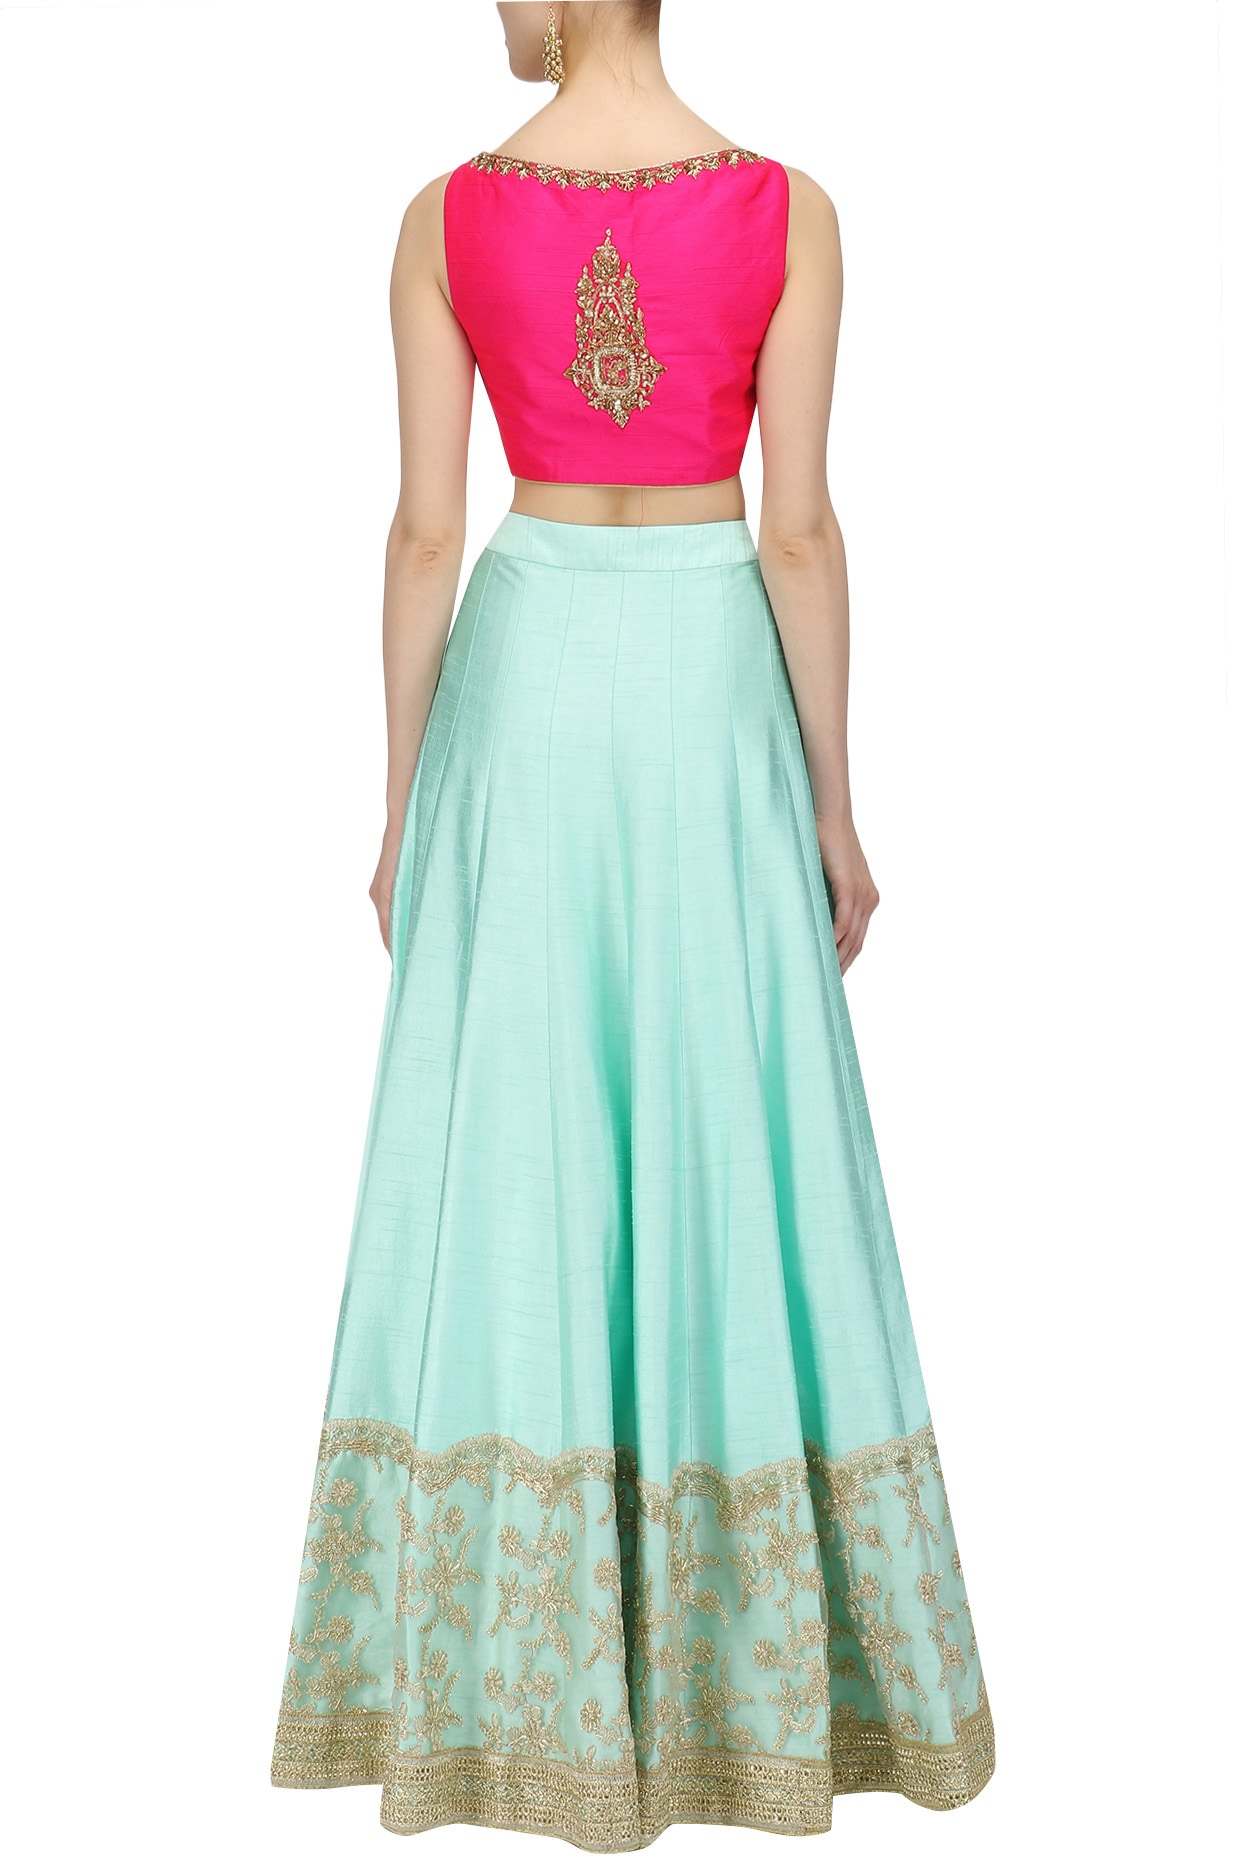 Papa Don'T Preach By Shubhika | Pink And Green Strips Half Lehenga With  Blouse | INDIASPOPUP.COM